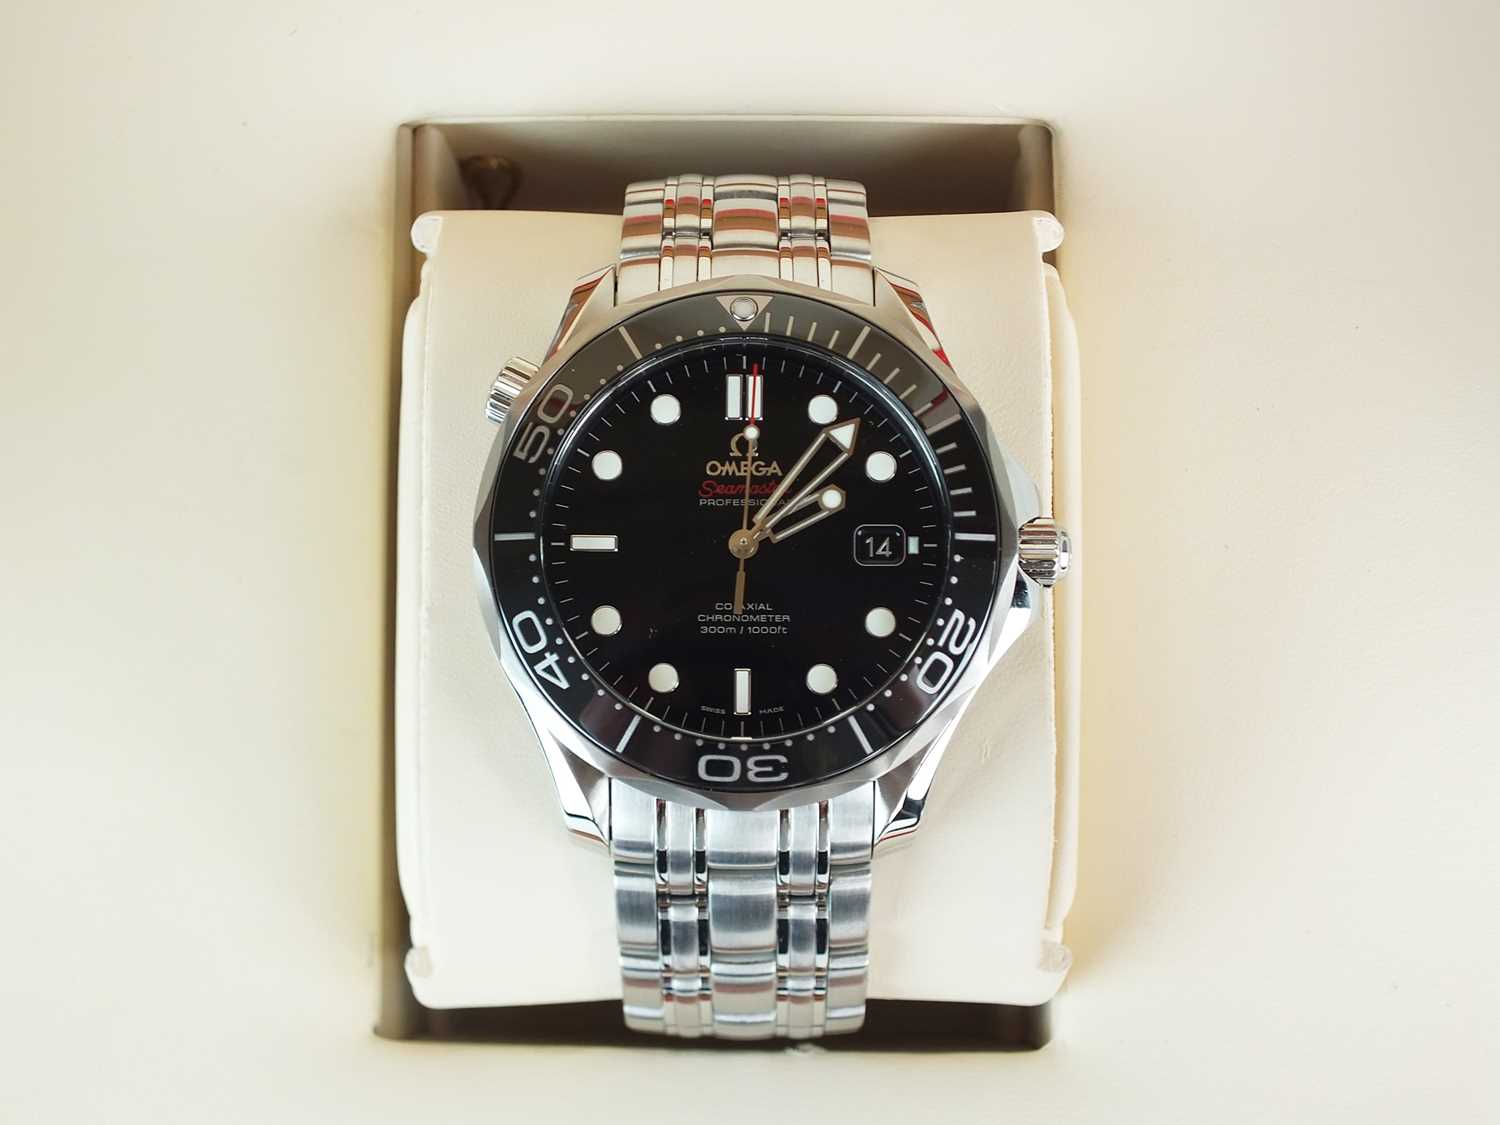 A Gentleman's stainless steel Omega Seamaster Professional Co-Axial Chronometer wristwatch - Image 2 of 13